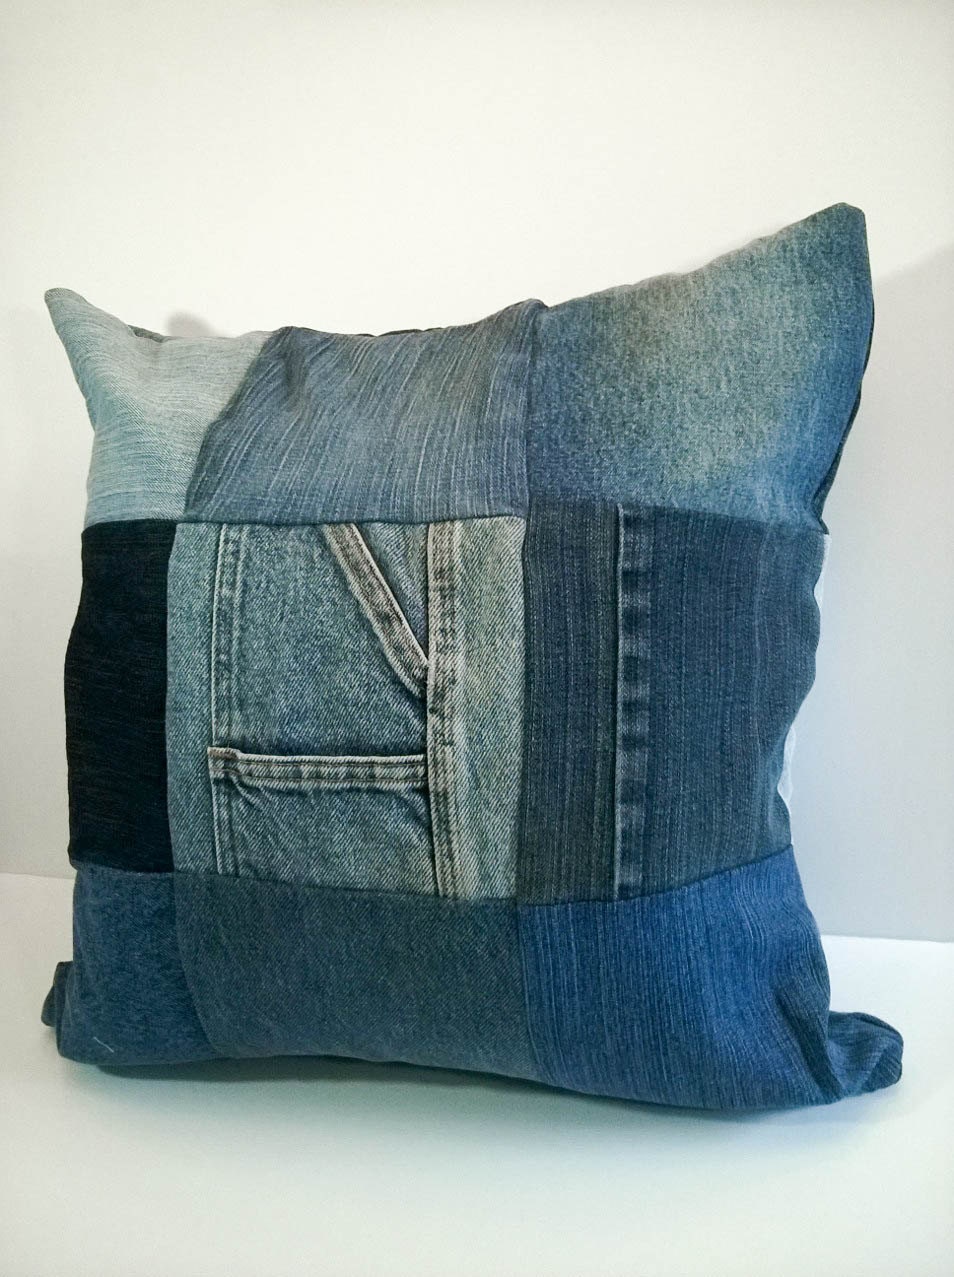 Up-cycled Denim Pillow Made of Recycled Jean Buttons 